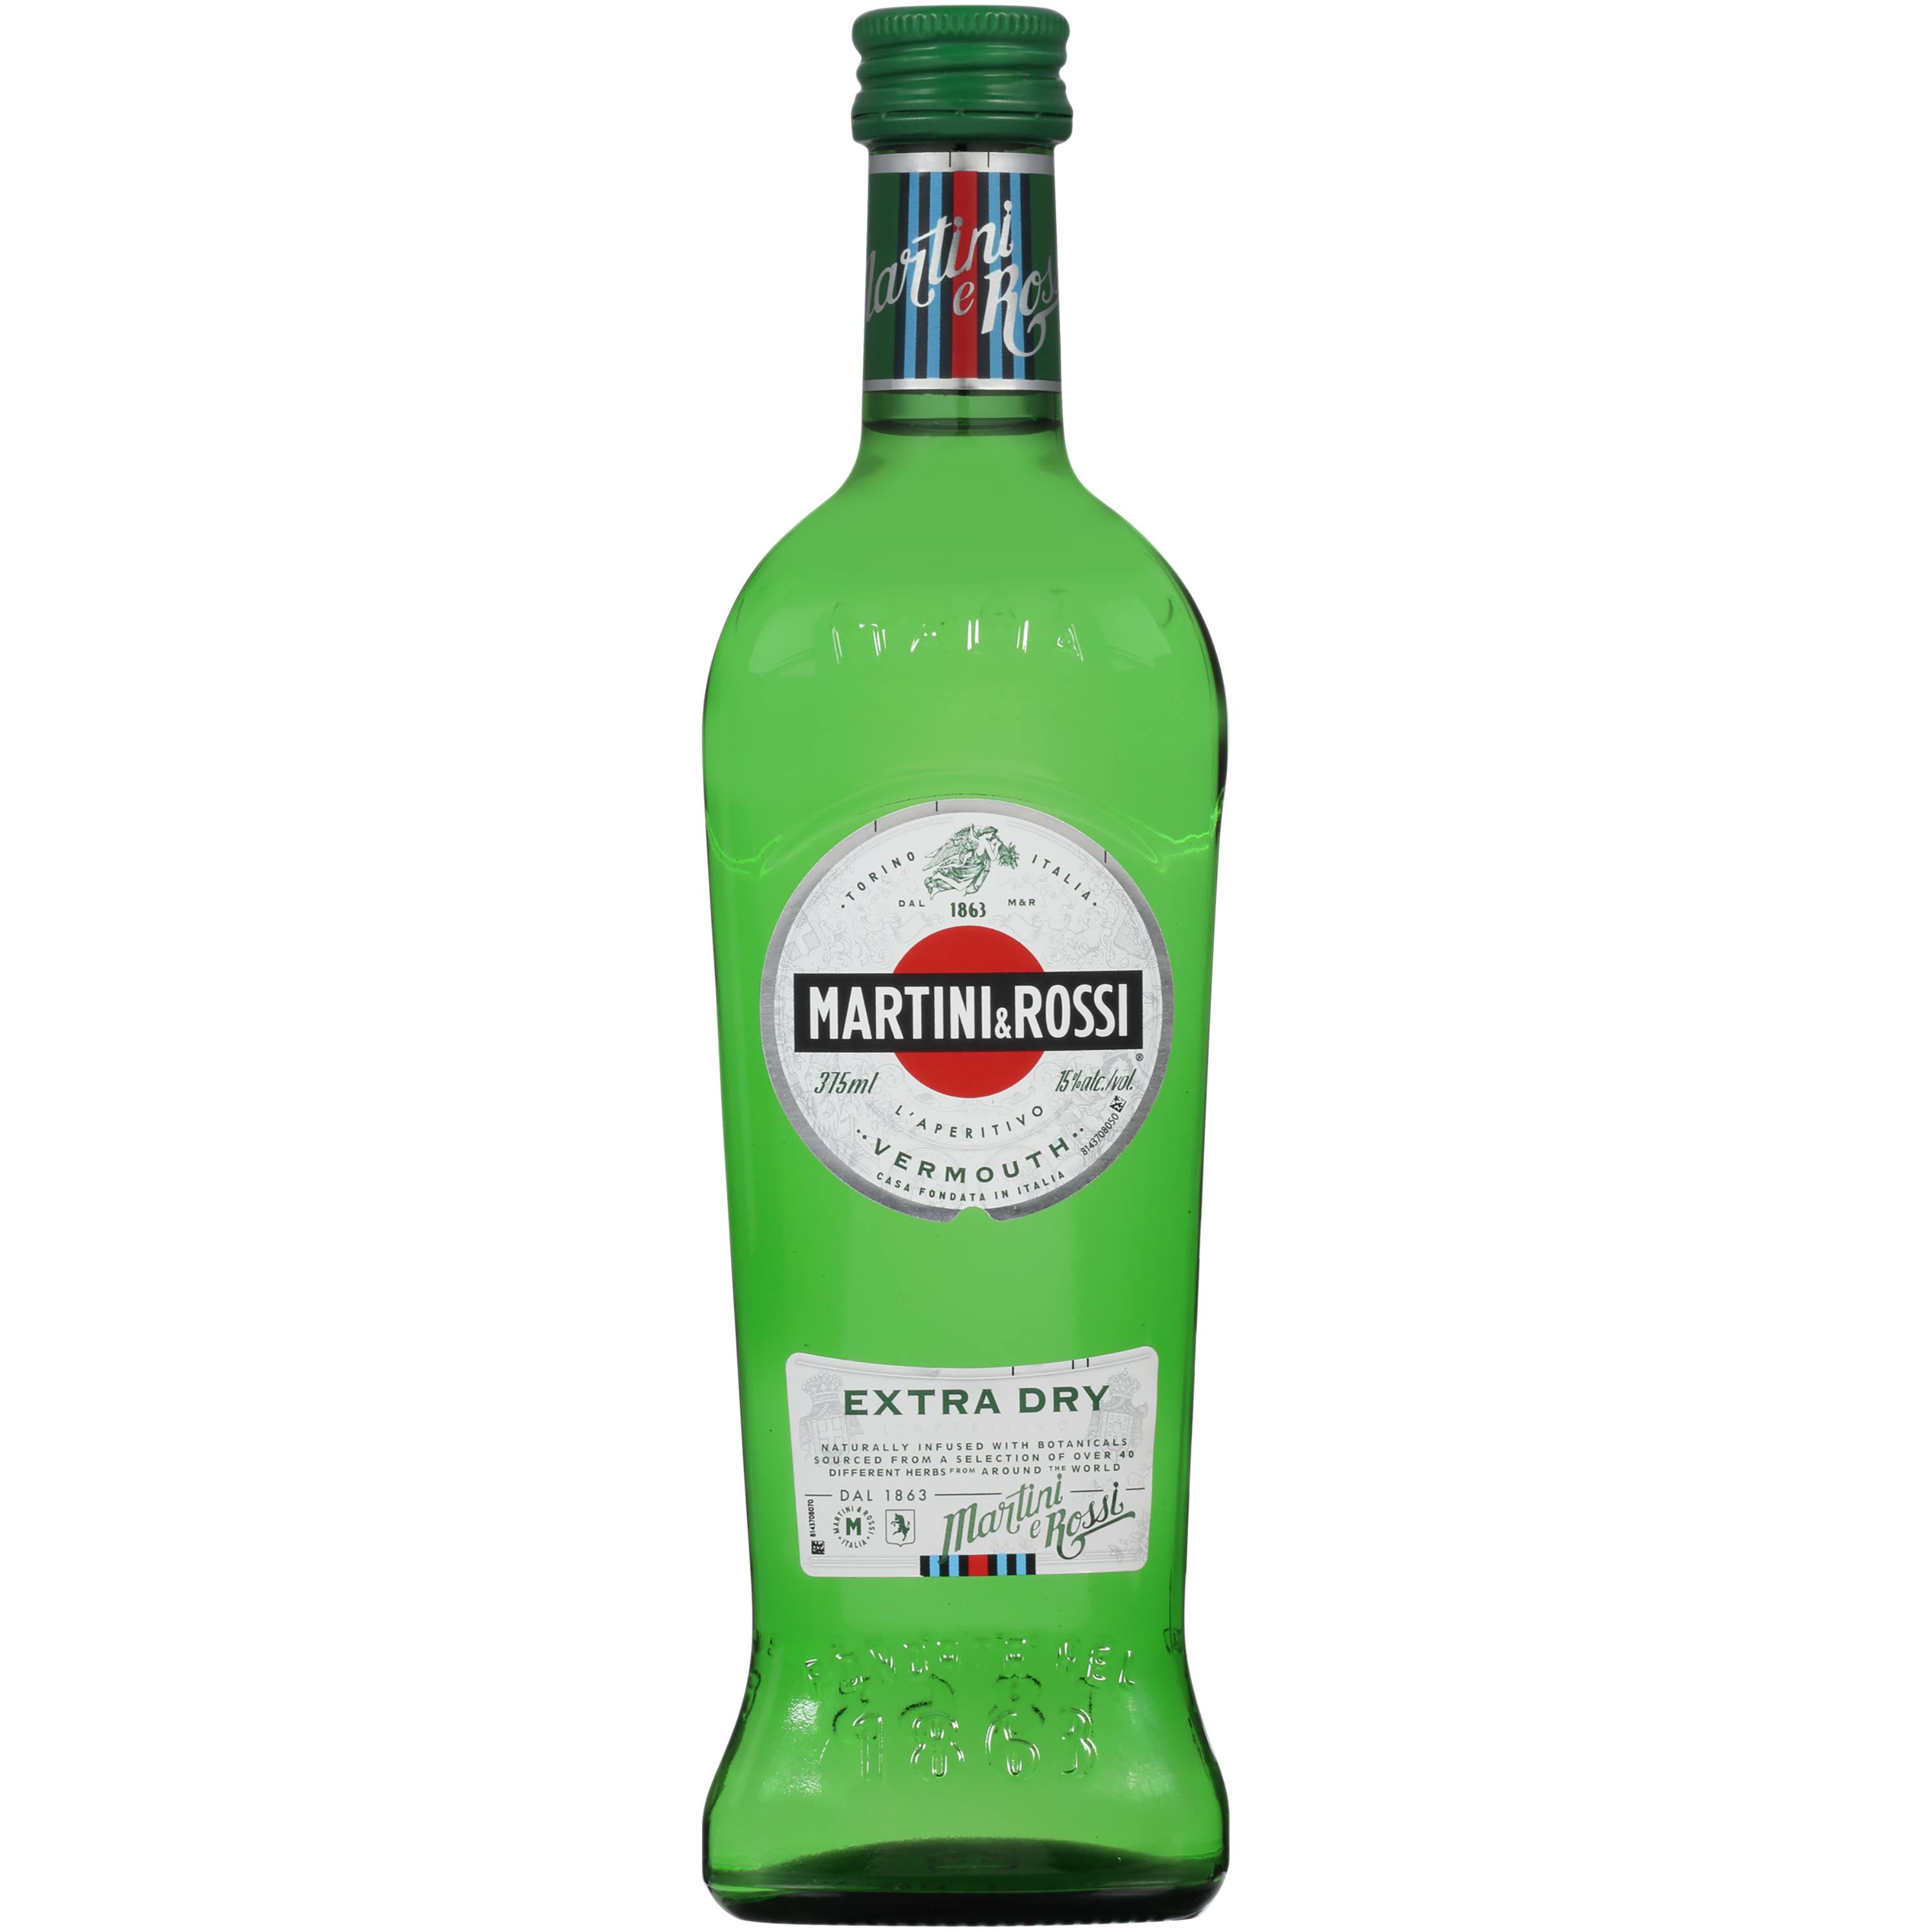 Martini & Rossi Vermouth, Extra Dry - 375 ml